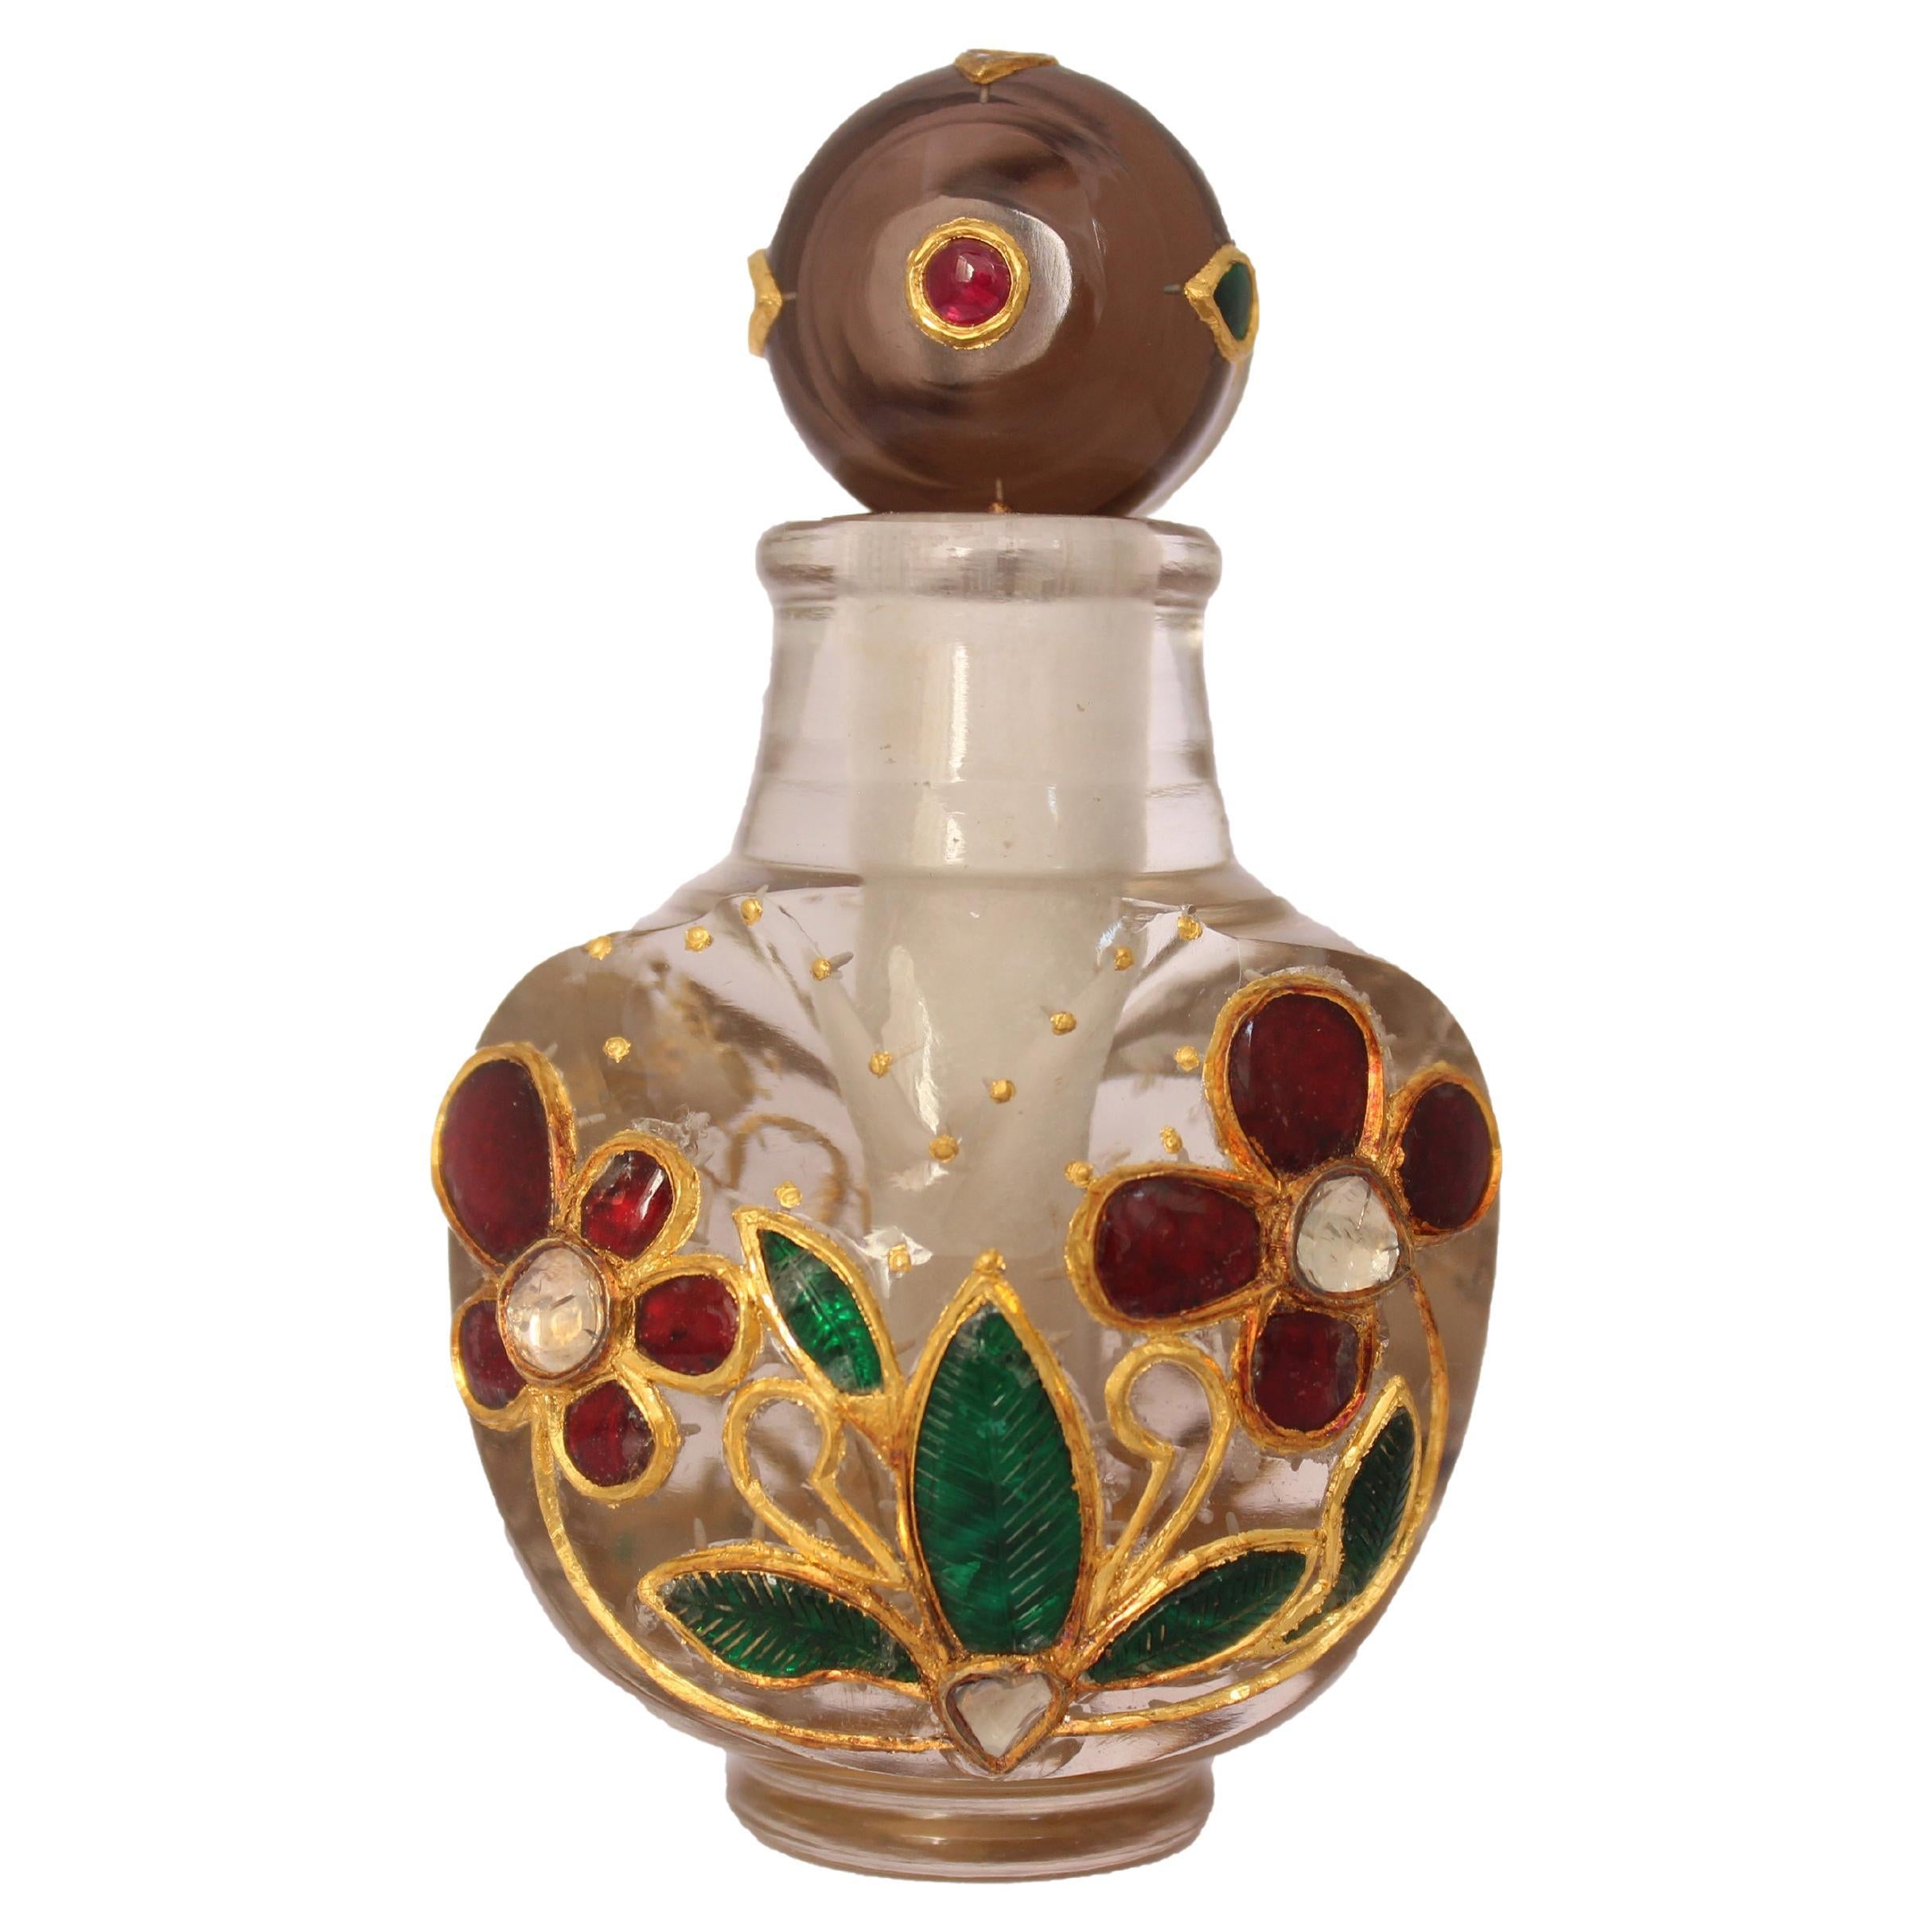 Mughal Natural Rock Crystal Perfume Flask Inlaid with Gold and Rubies